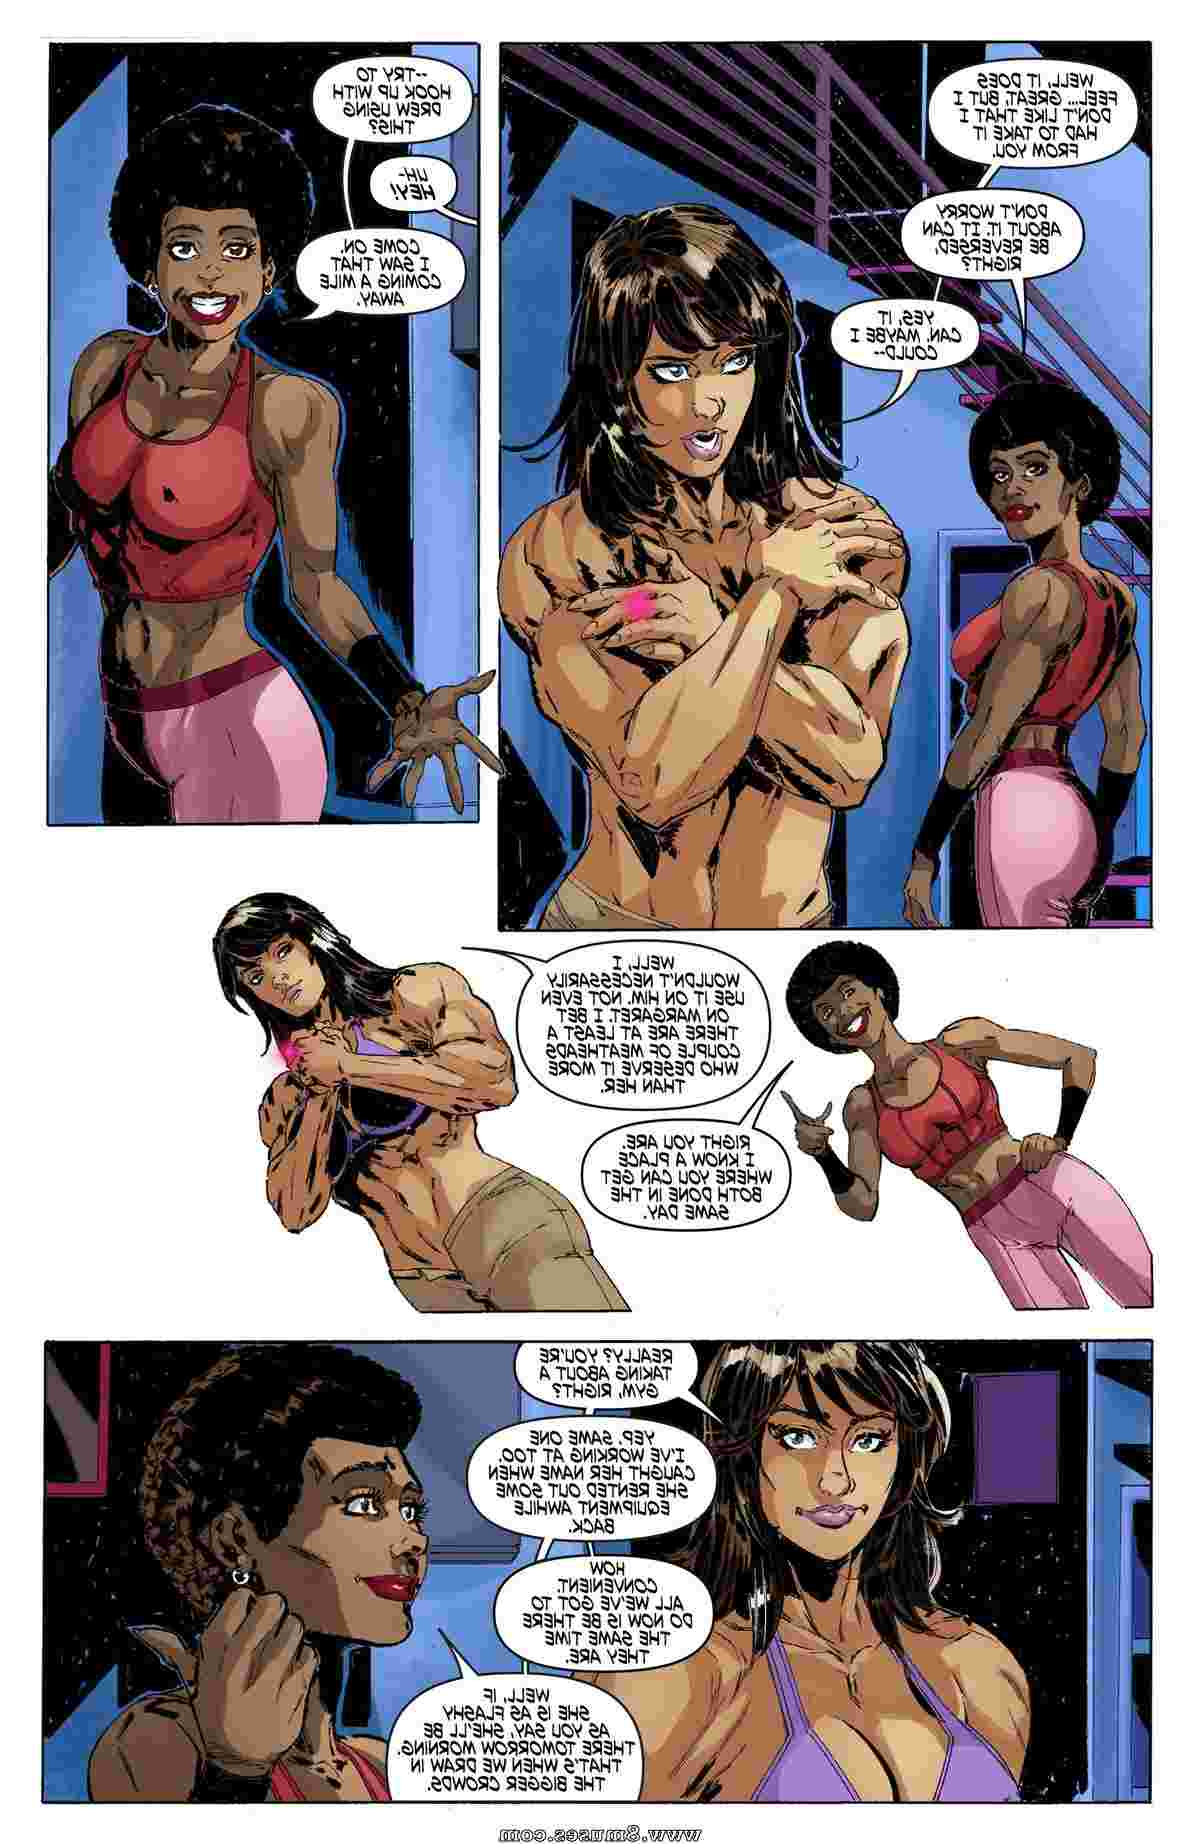 MuscleFan-Comics/Leveling-The-Field Leveling_The_Field__8muses_-_Sex_and_Porn_Comics_11.jpg